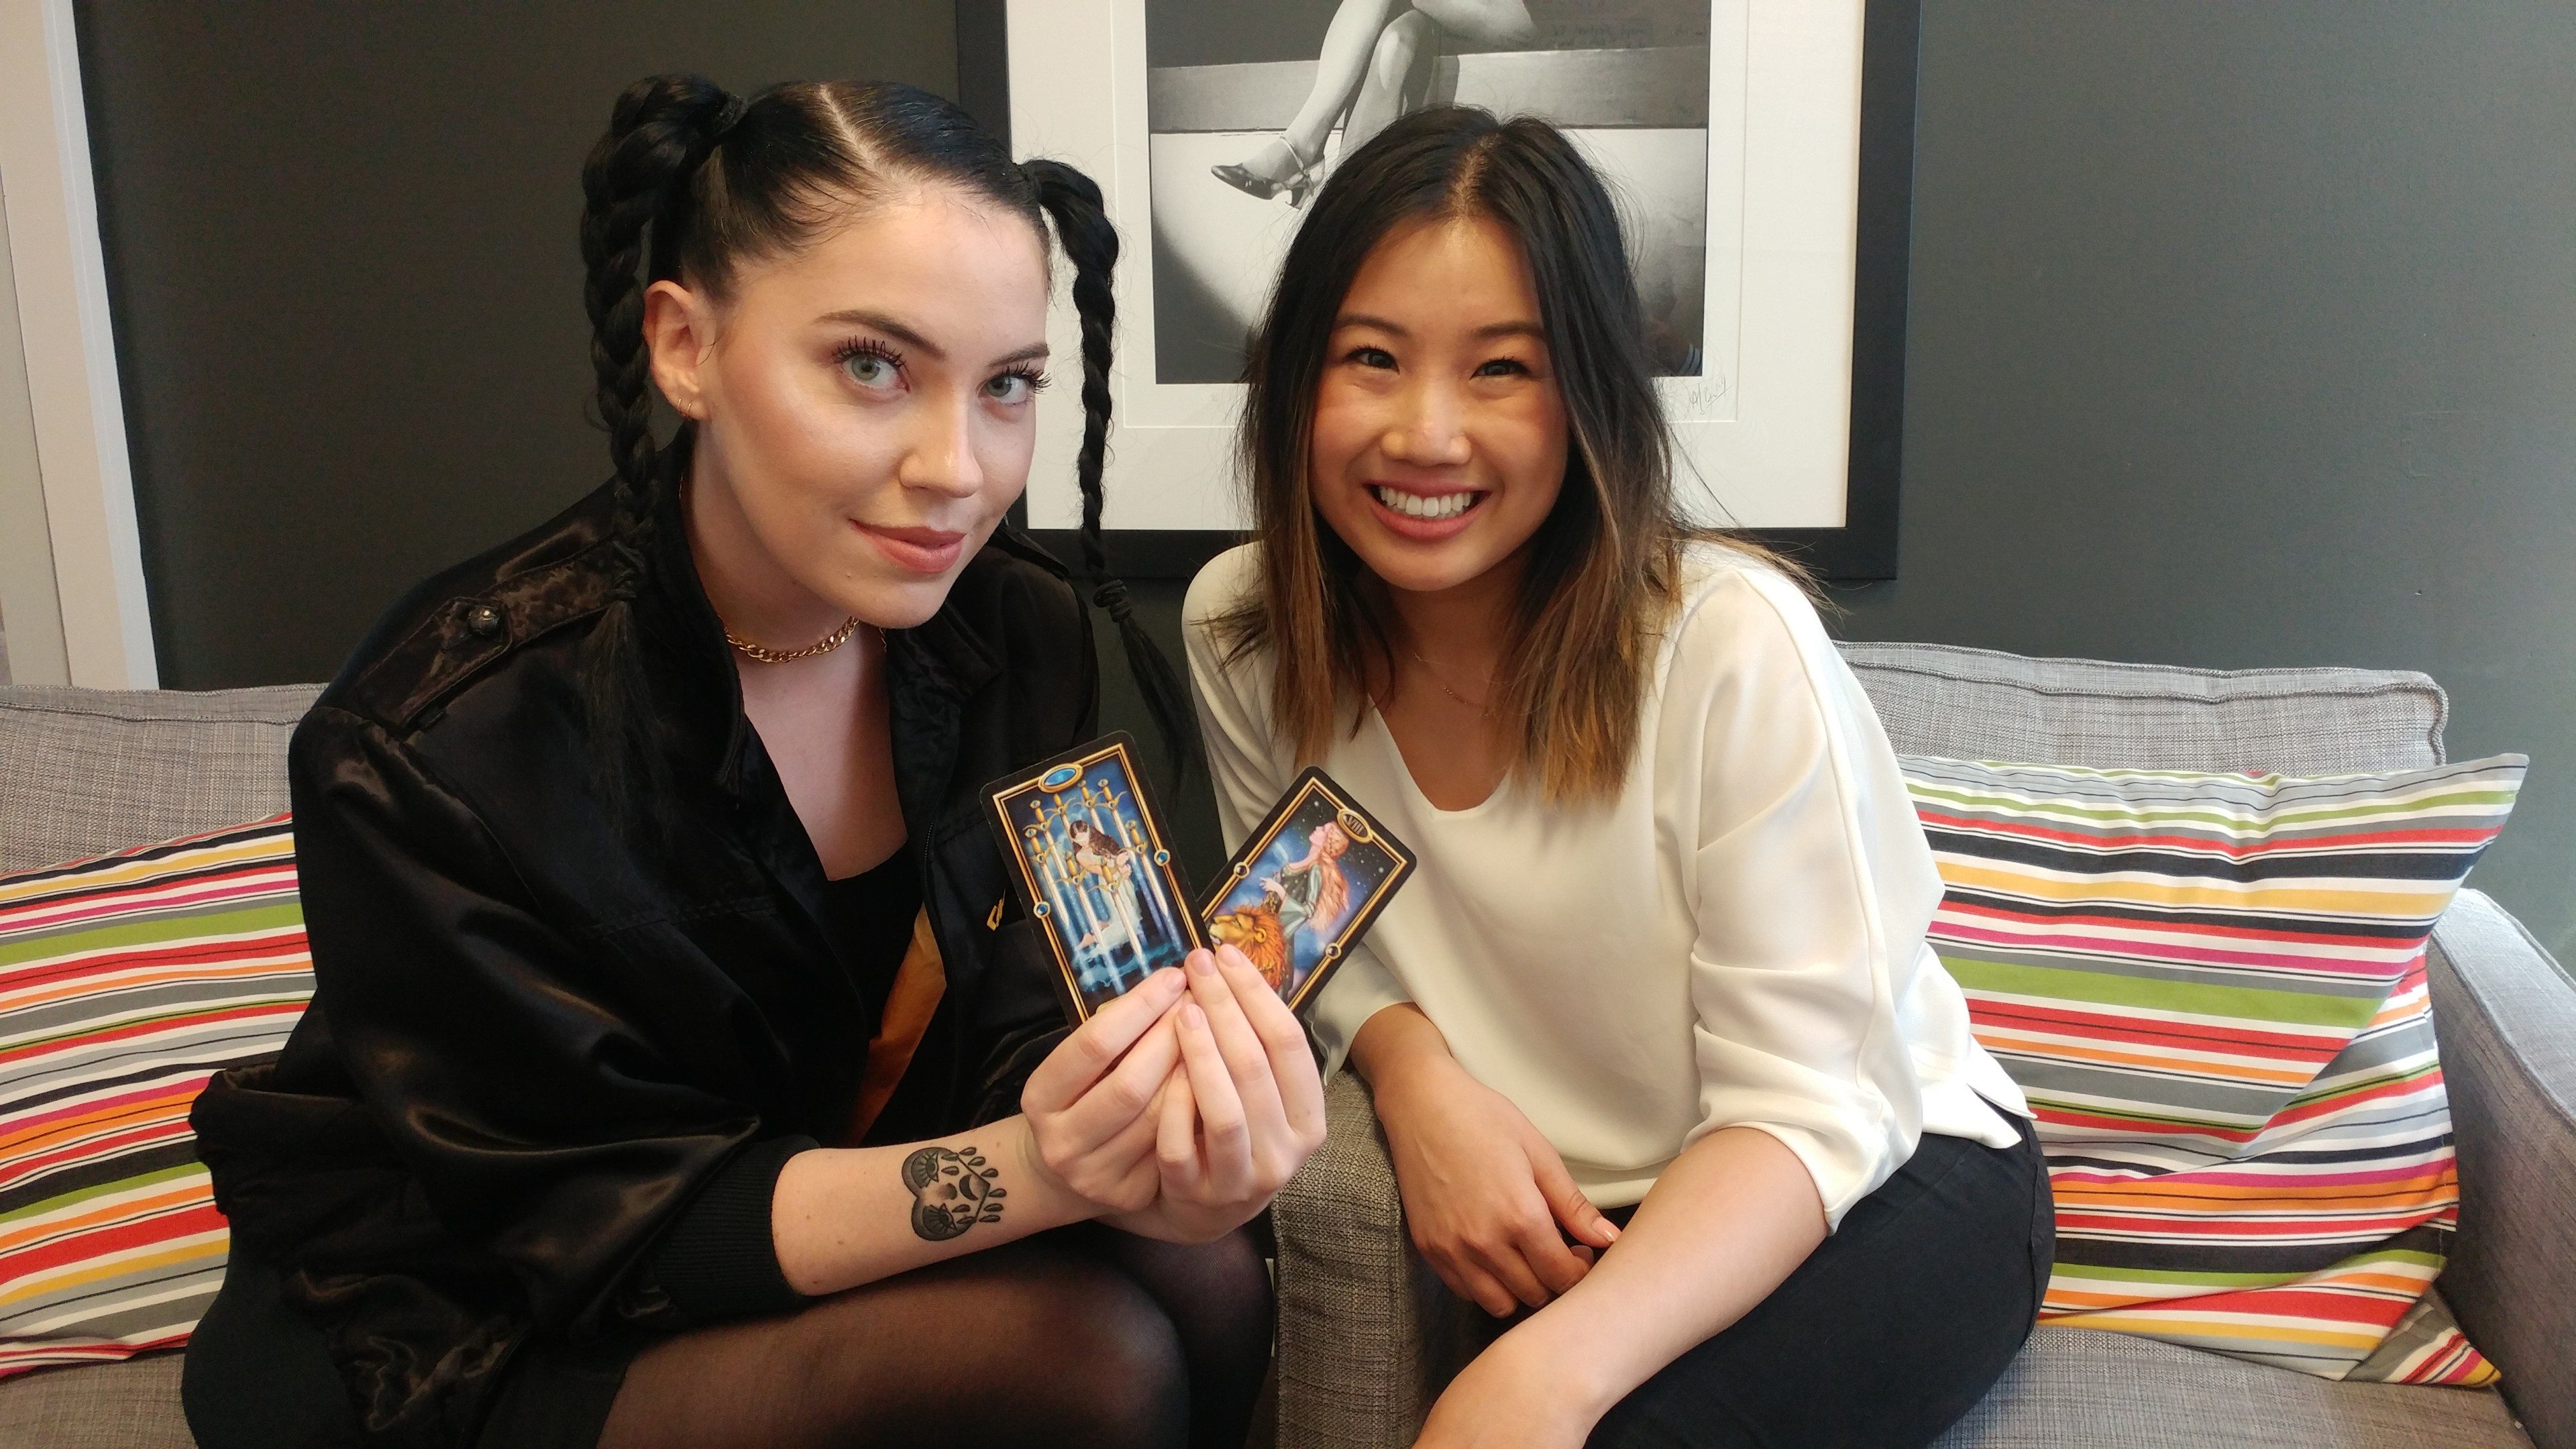 Watch What Happens When Bishop Briggs Does a Tarot Card Reading.